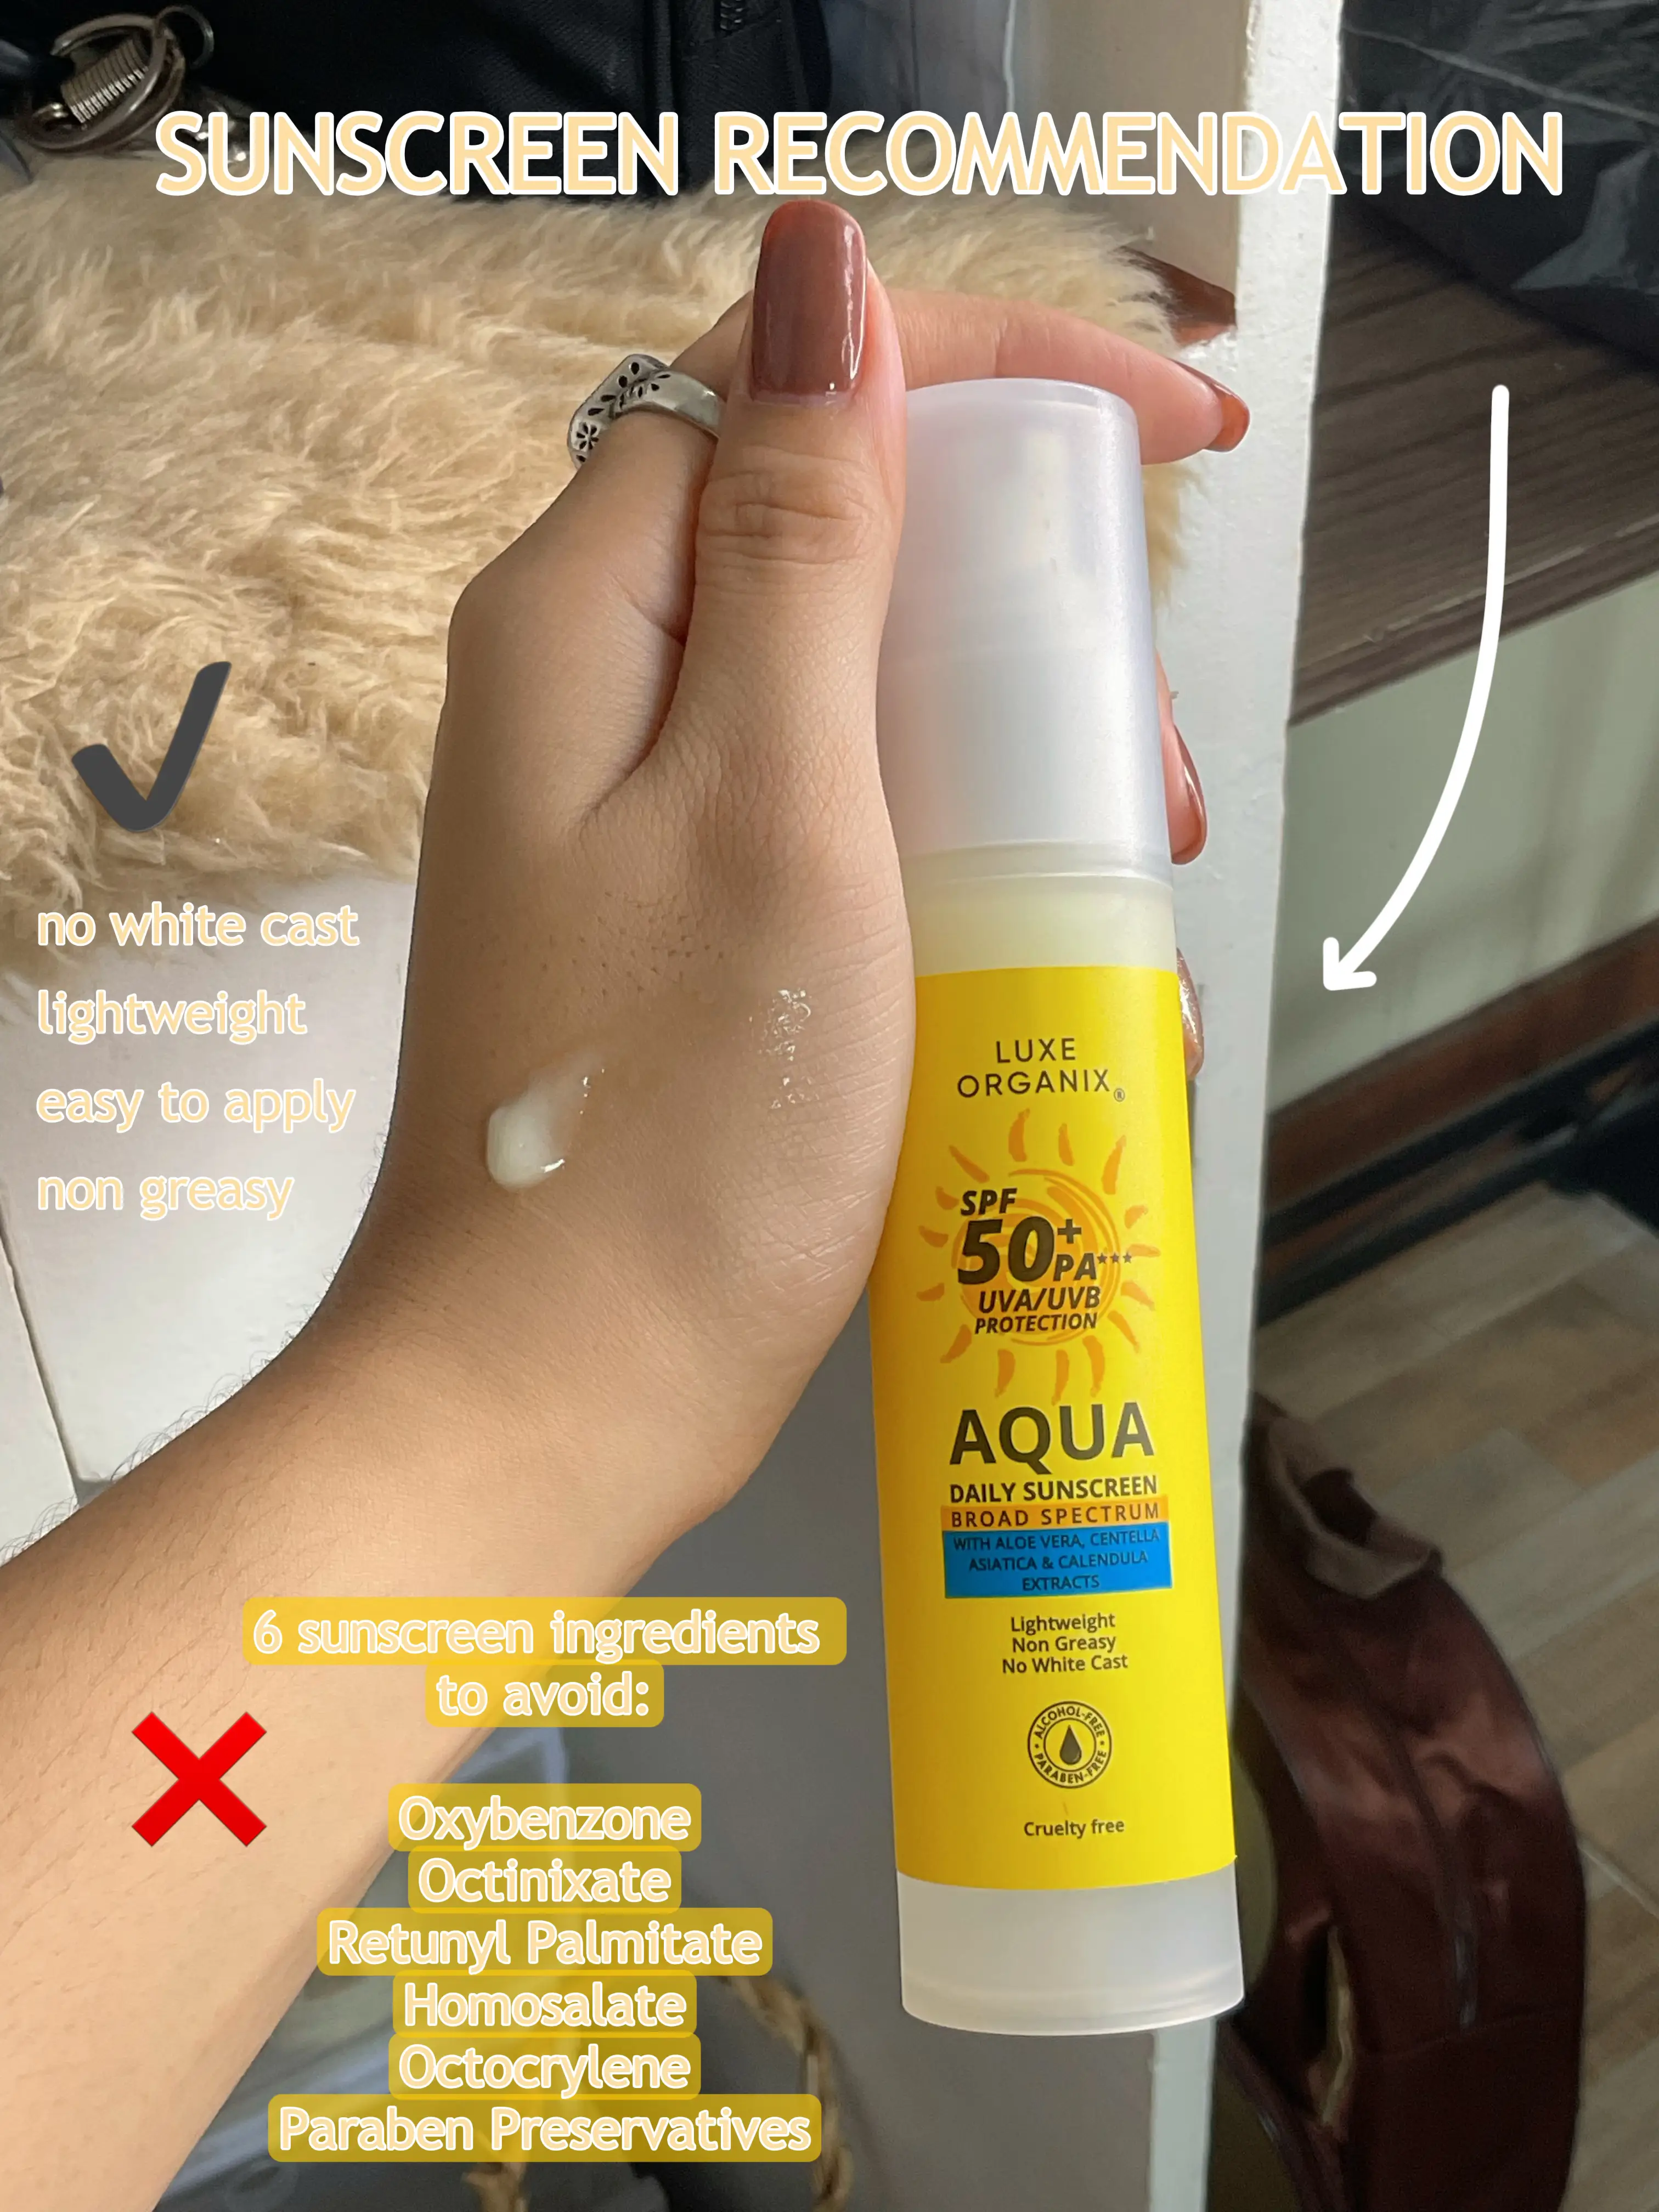 A SUNSCREEN SAFETY GUIDE YOU NEED TO KNOW 💛☀️ | Gallery posted 